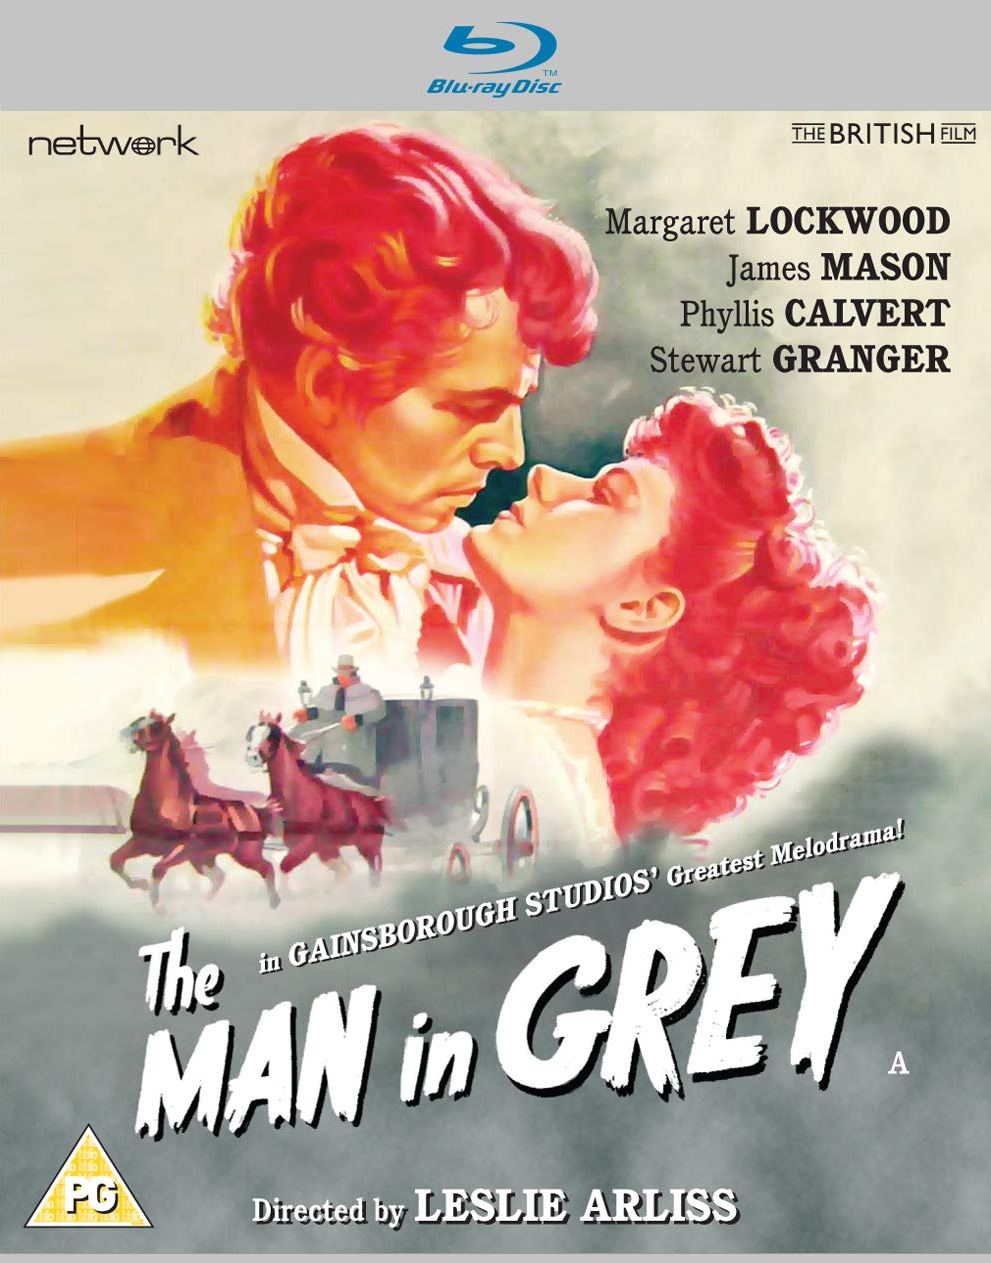 The Man in Grey Blu-ray from Network and The British Film (2020)